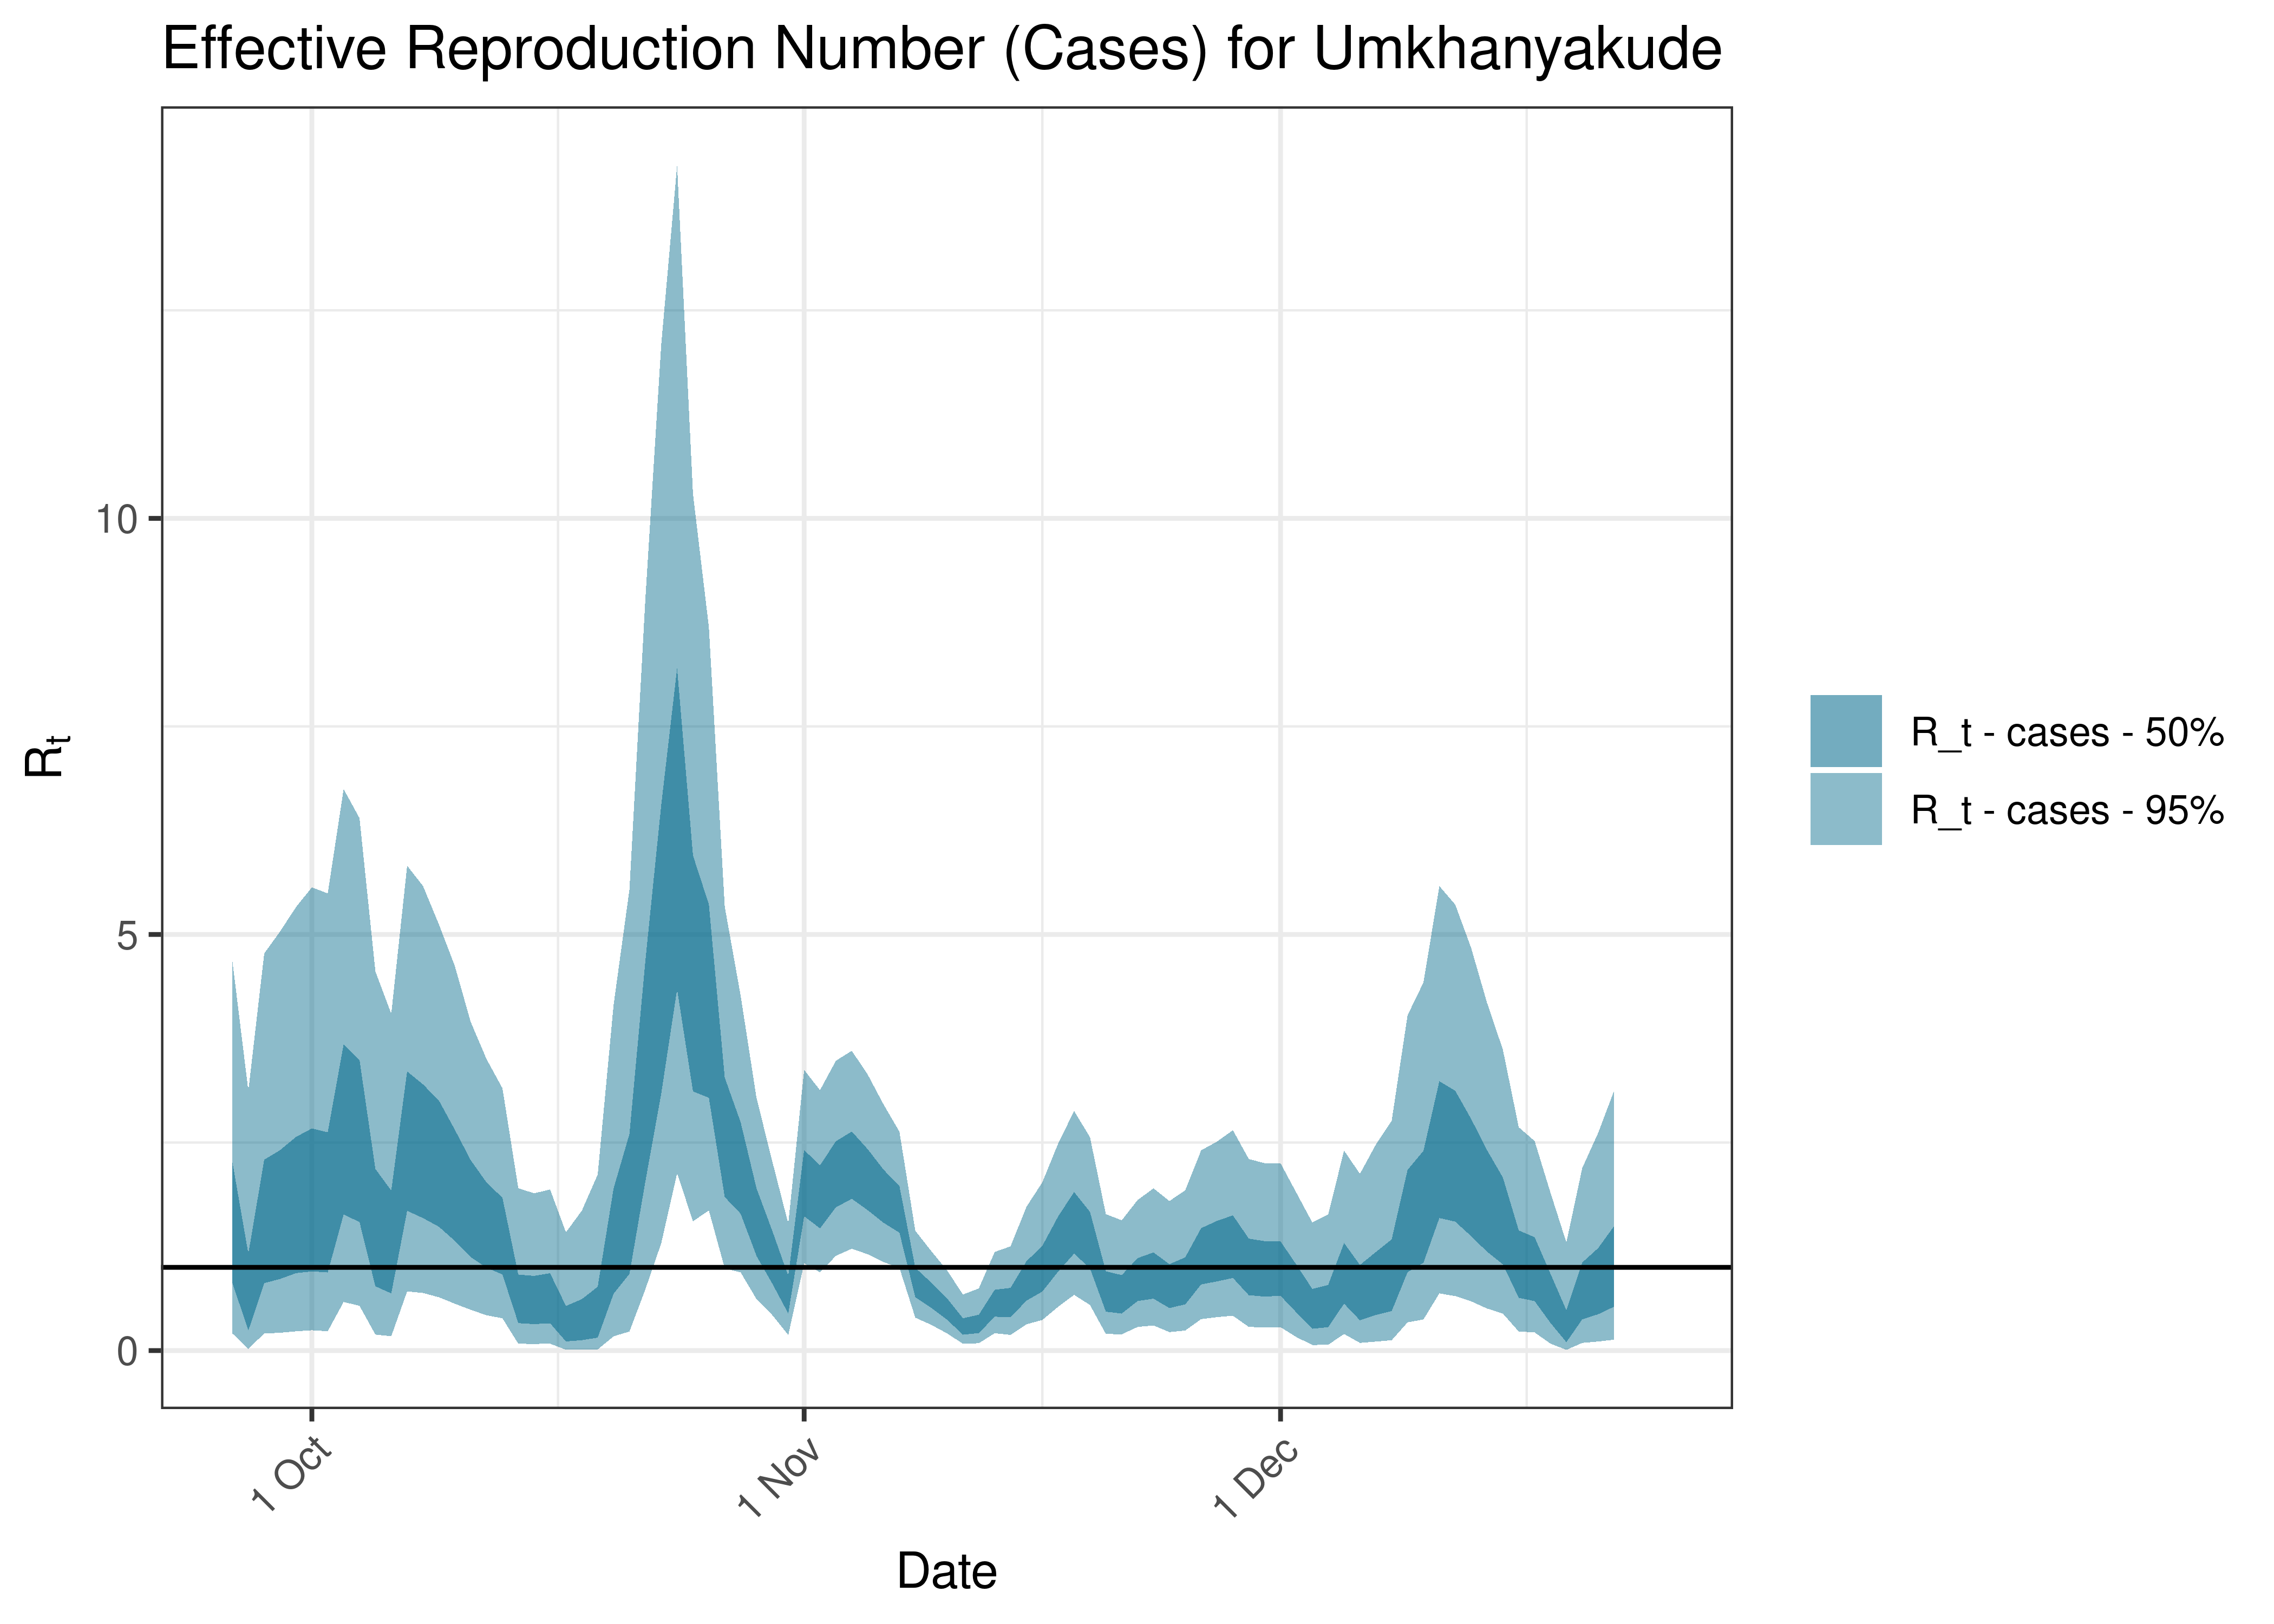 Estimated Effective Reproduction Number Based on Cases for Umkhanyakude over last 90 days